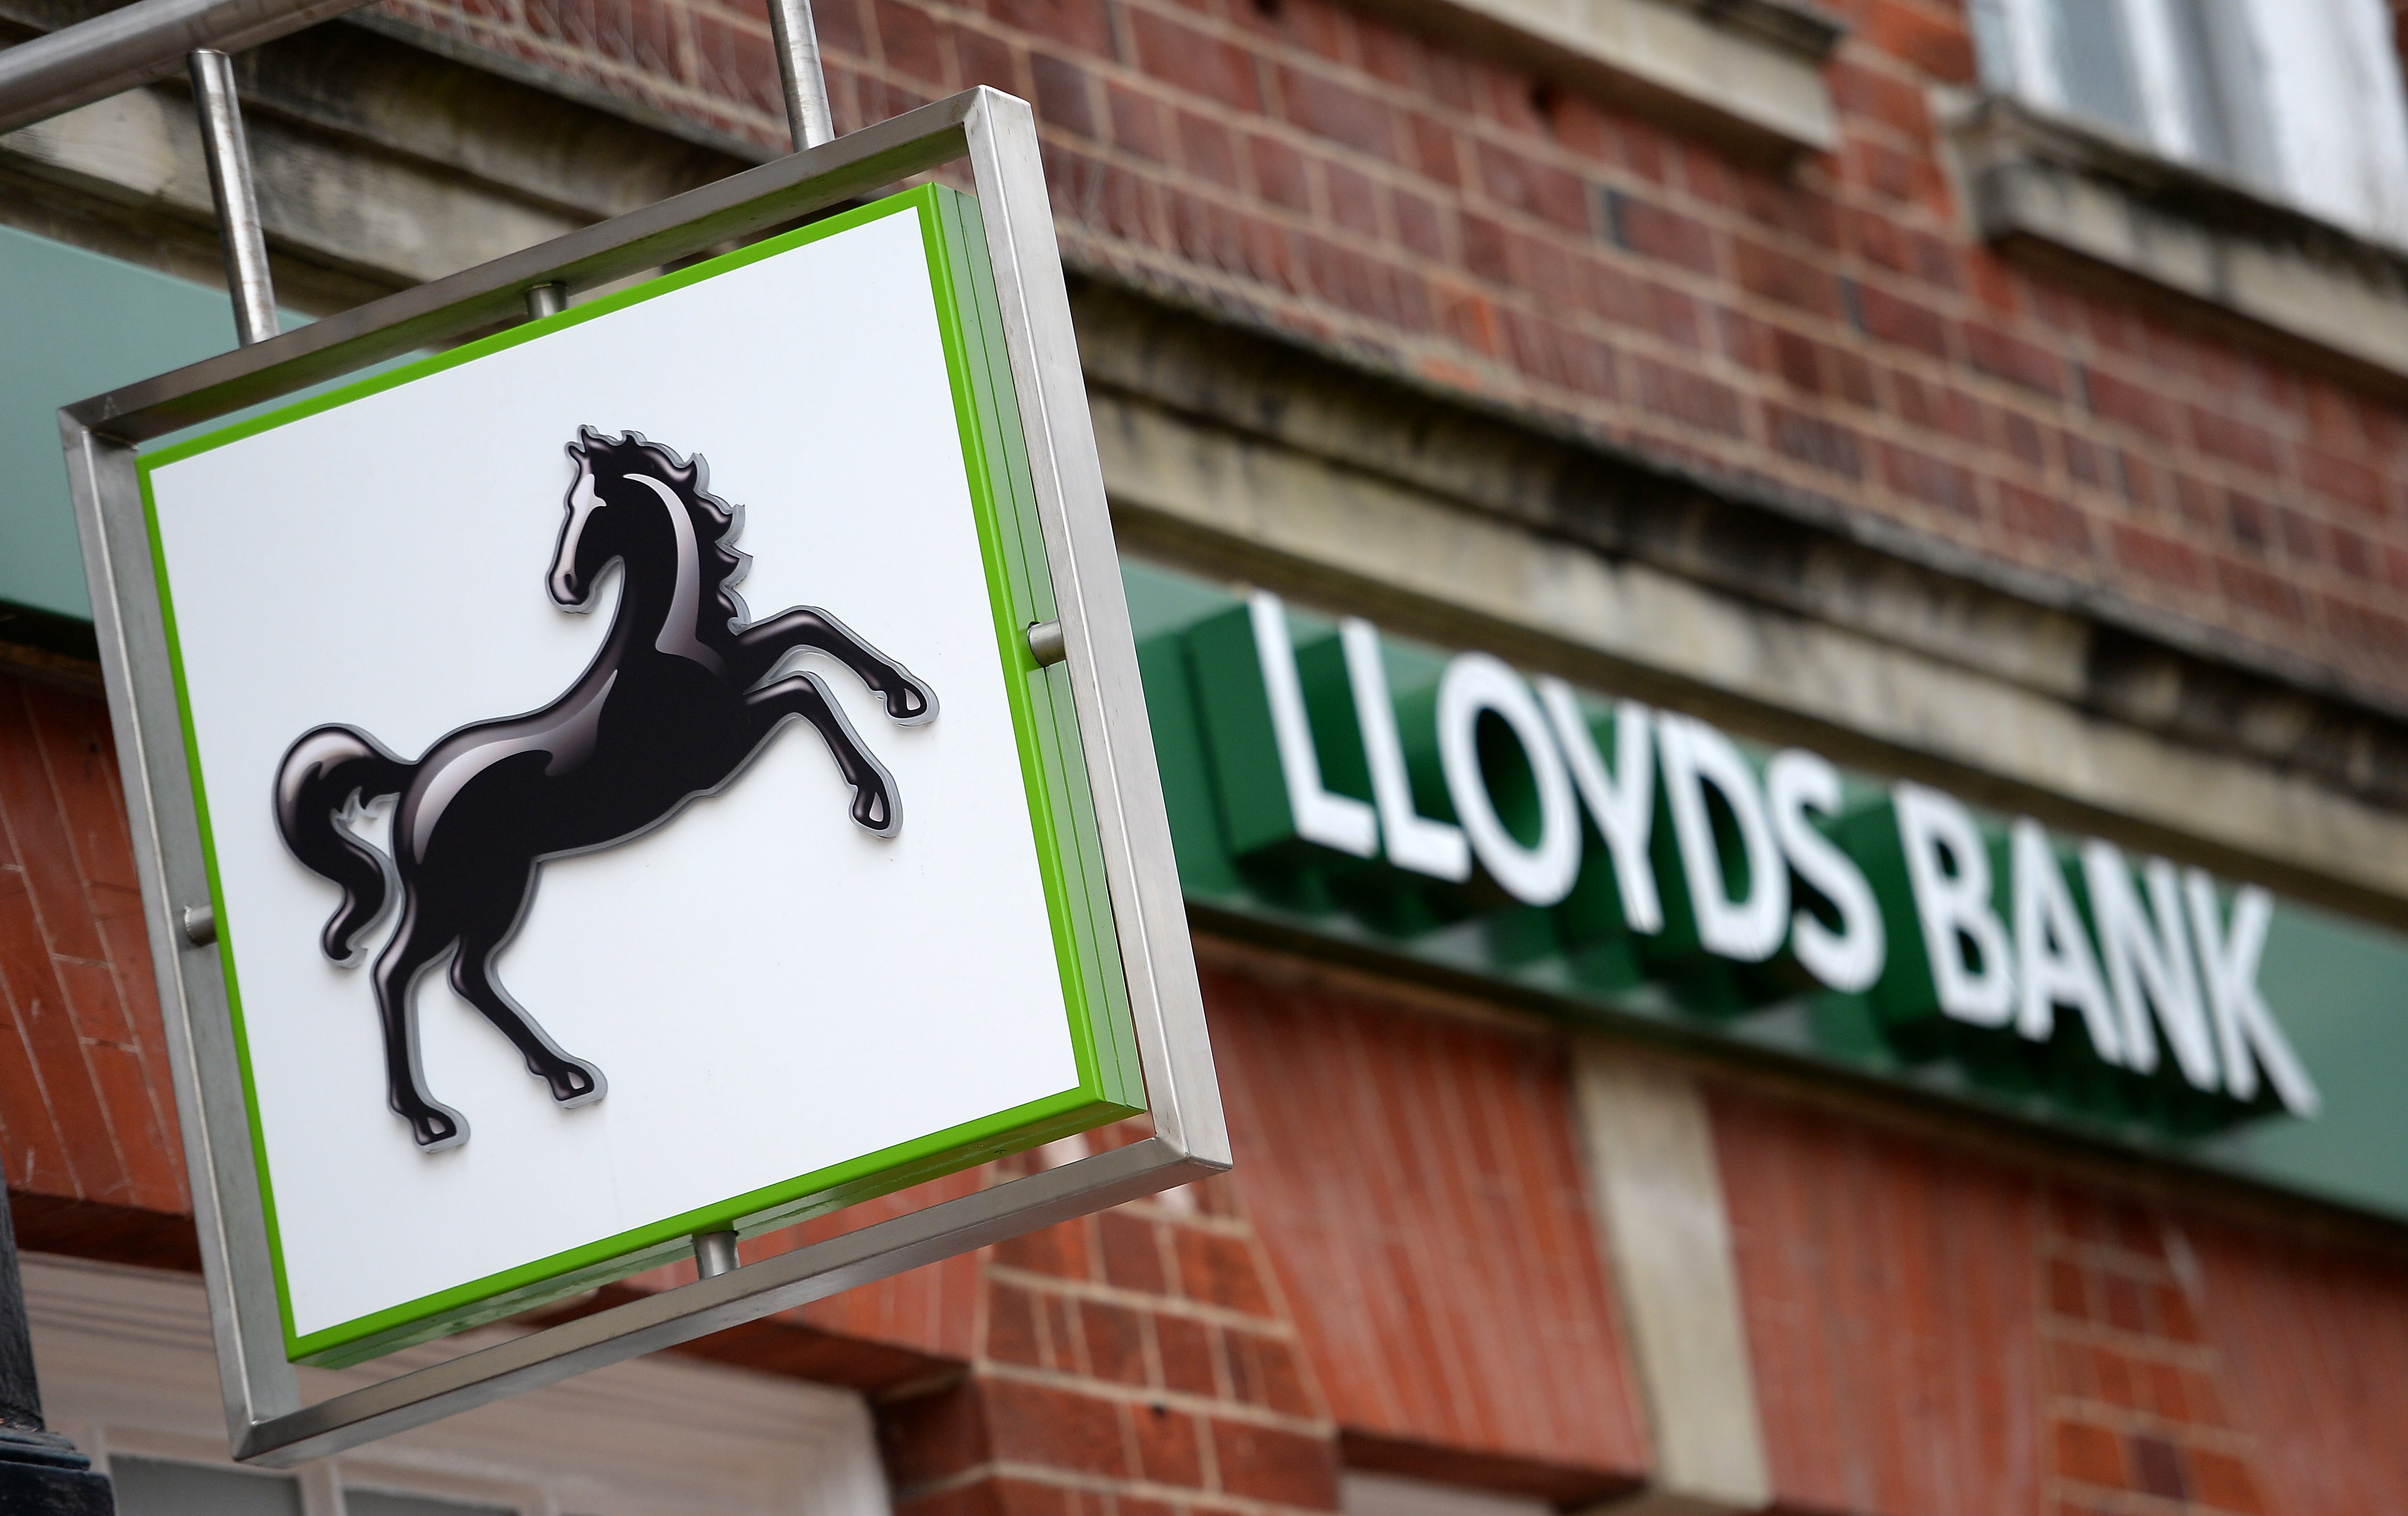 A pilot scheme launched by Lloyds Banking Group and the police is using the proceeds of crime to fight fraud and support victims (Andrew Matthews/PA)